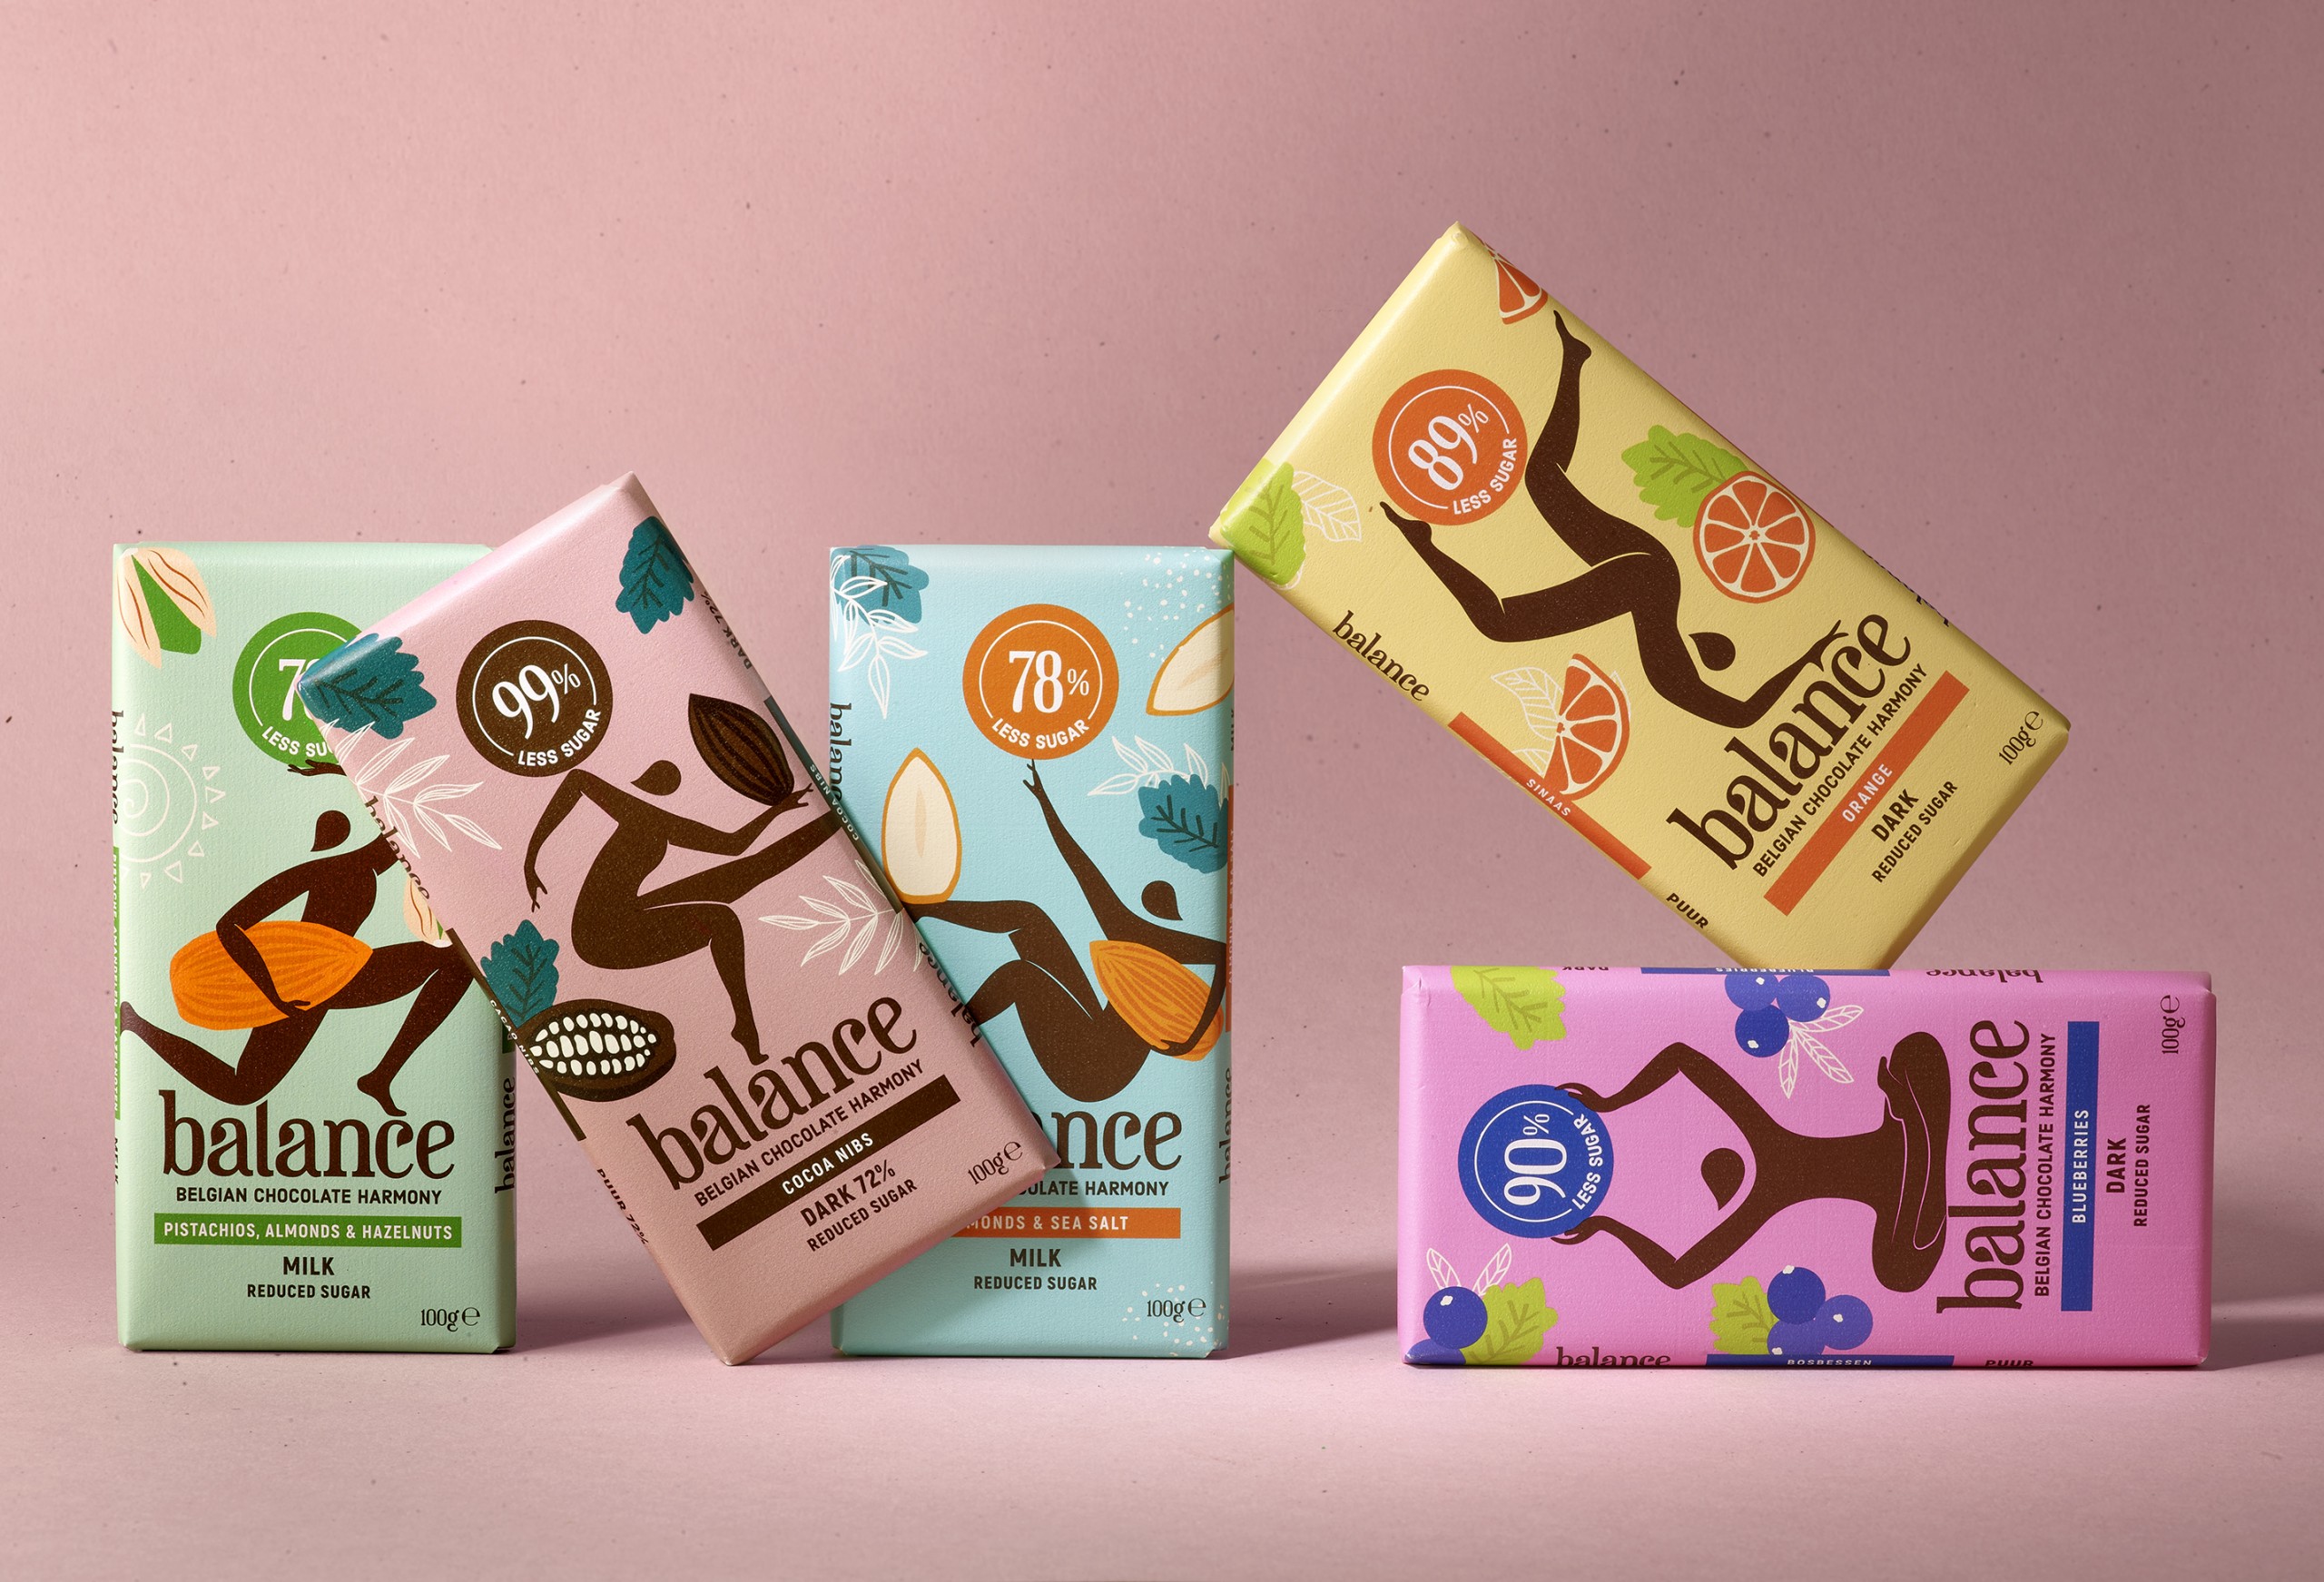 Quatre Mains package design - Package design packaging, design, chocolate